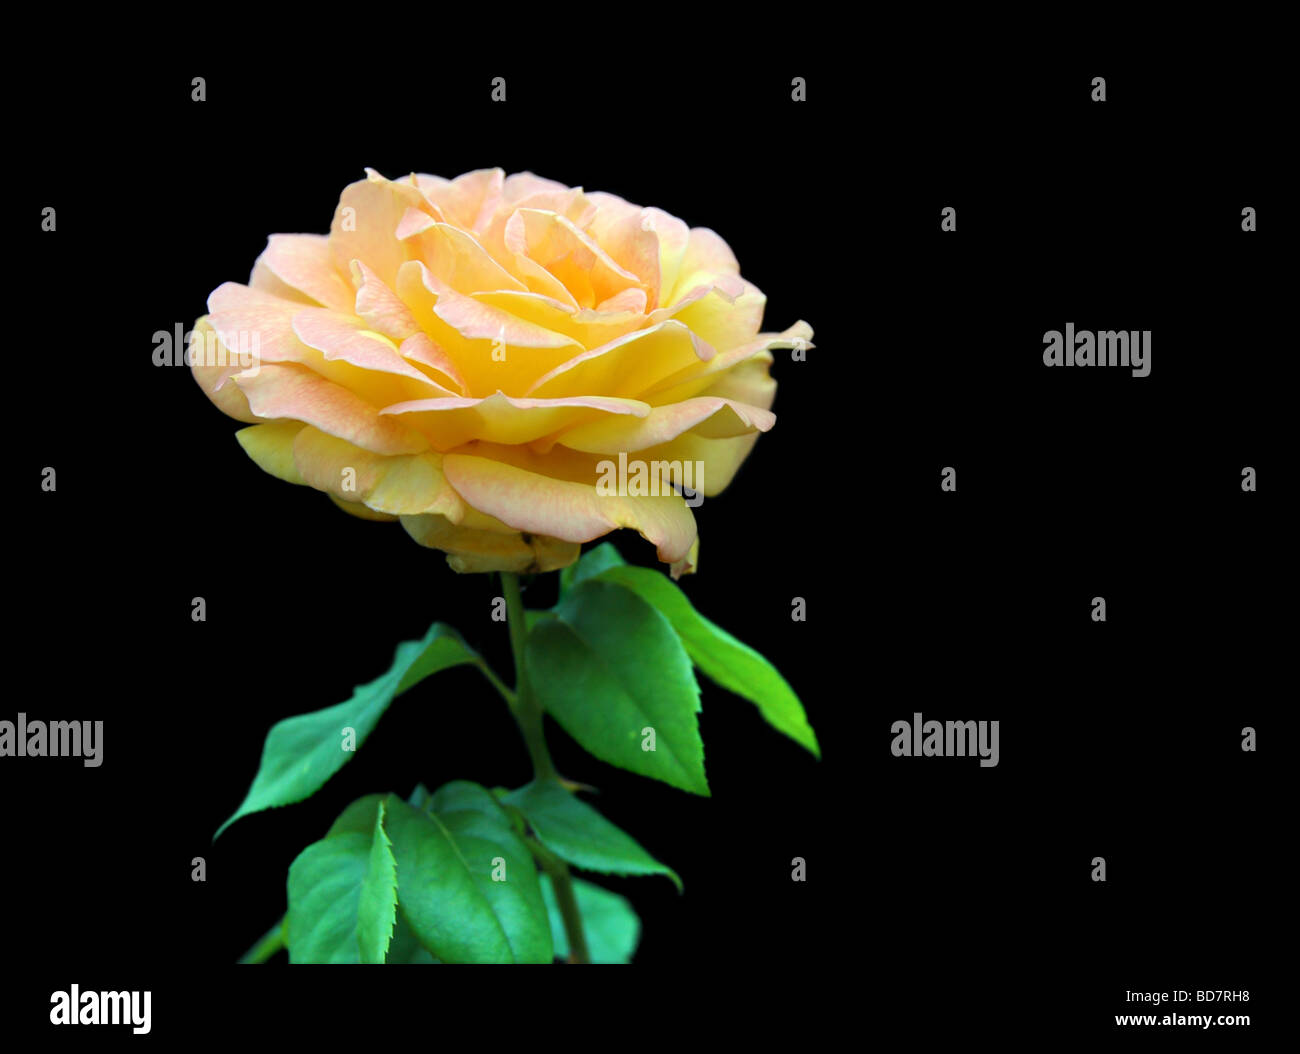 Yellow rose with leaves isolated against a black background Stock Photo